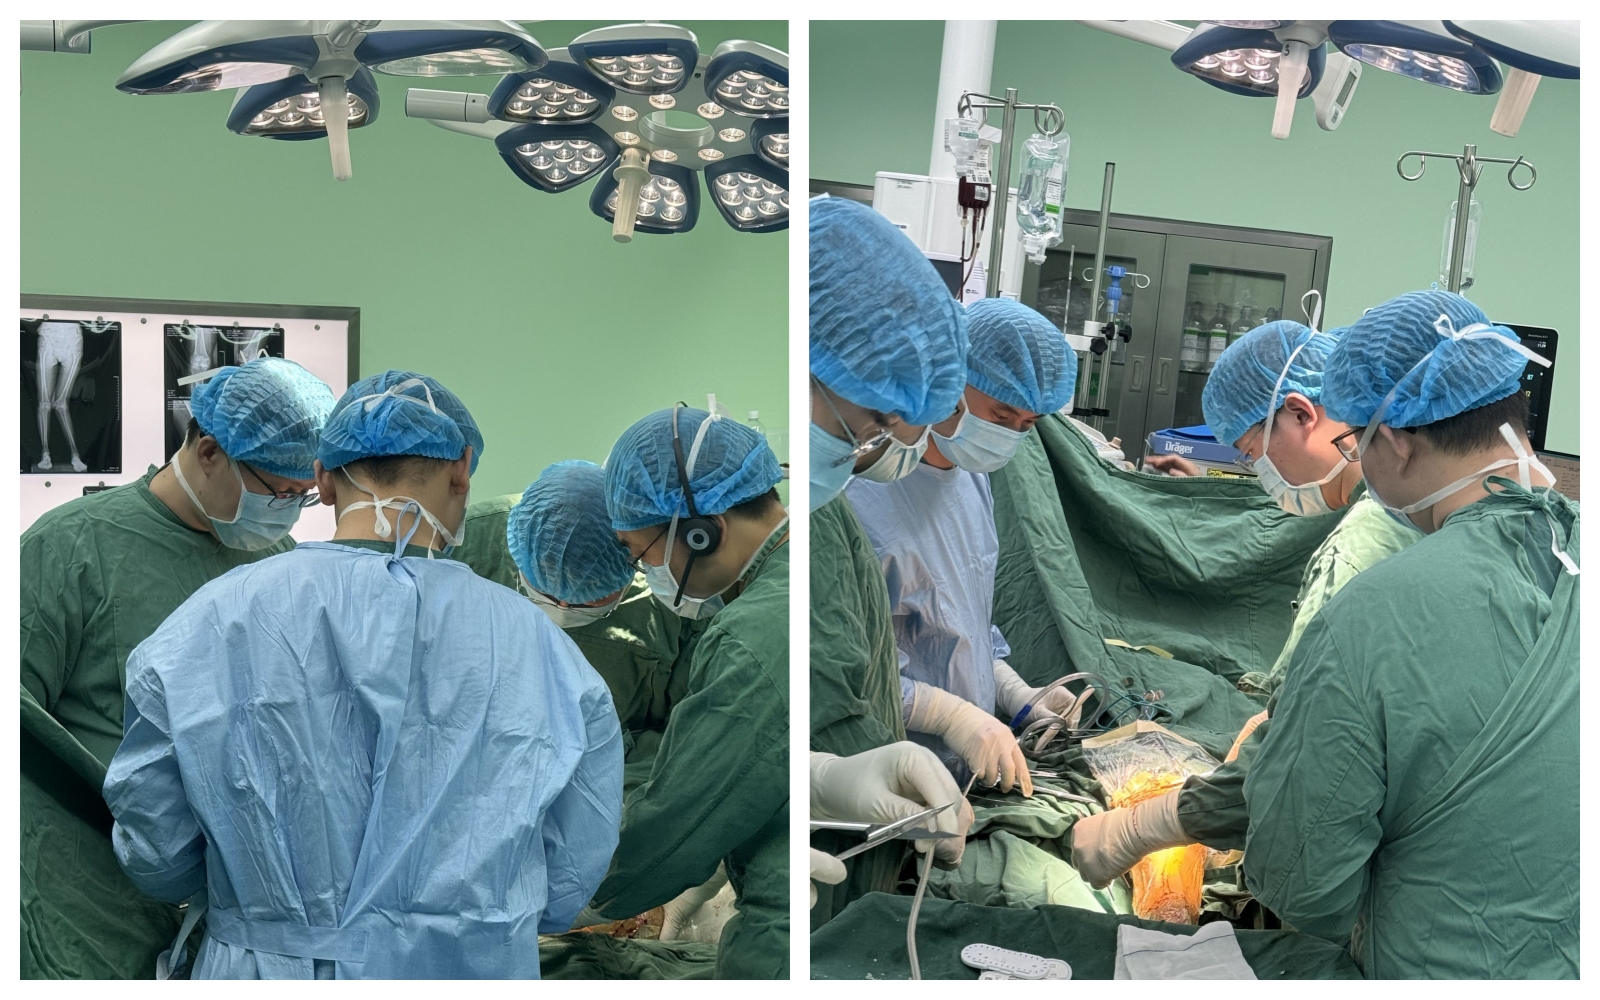 Jointly hosted by JUST Medical and Zhengzhou Orthopedic Hospital, the "Belt and Road Initiatives" Live Surgery was a complete success.